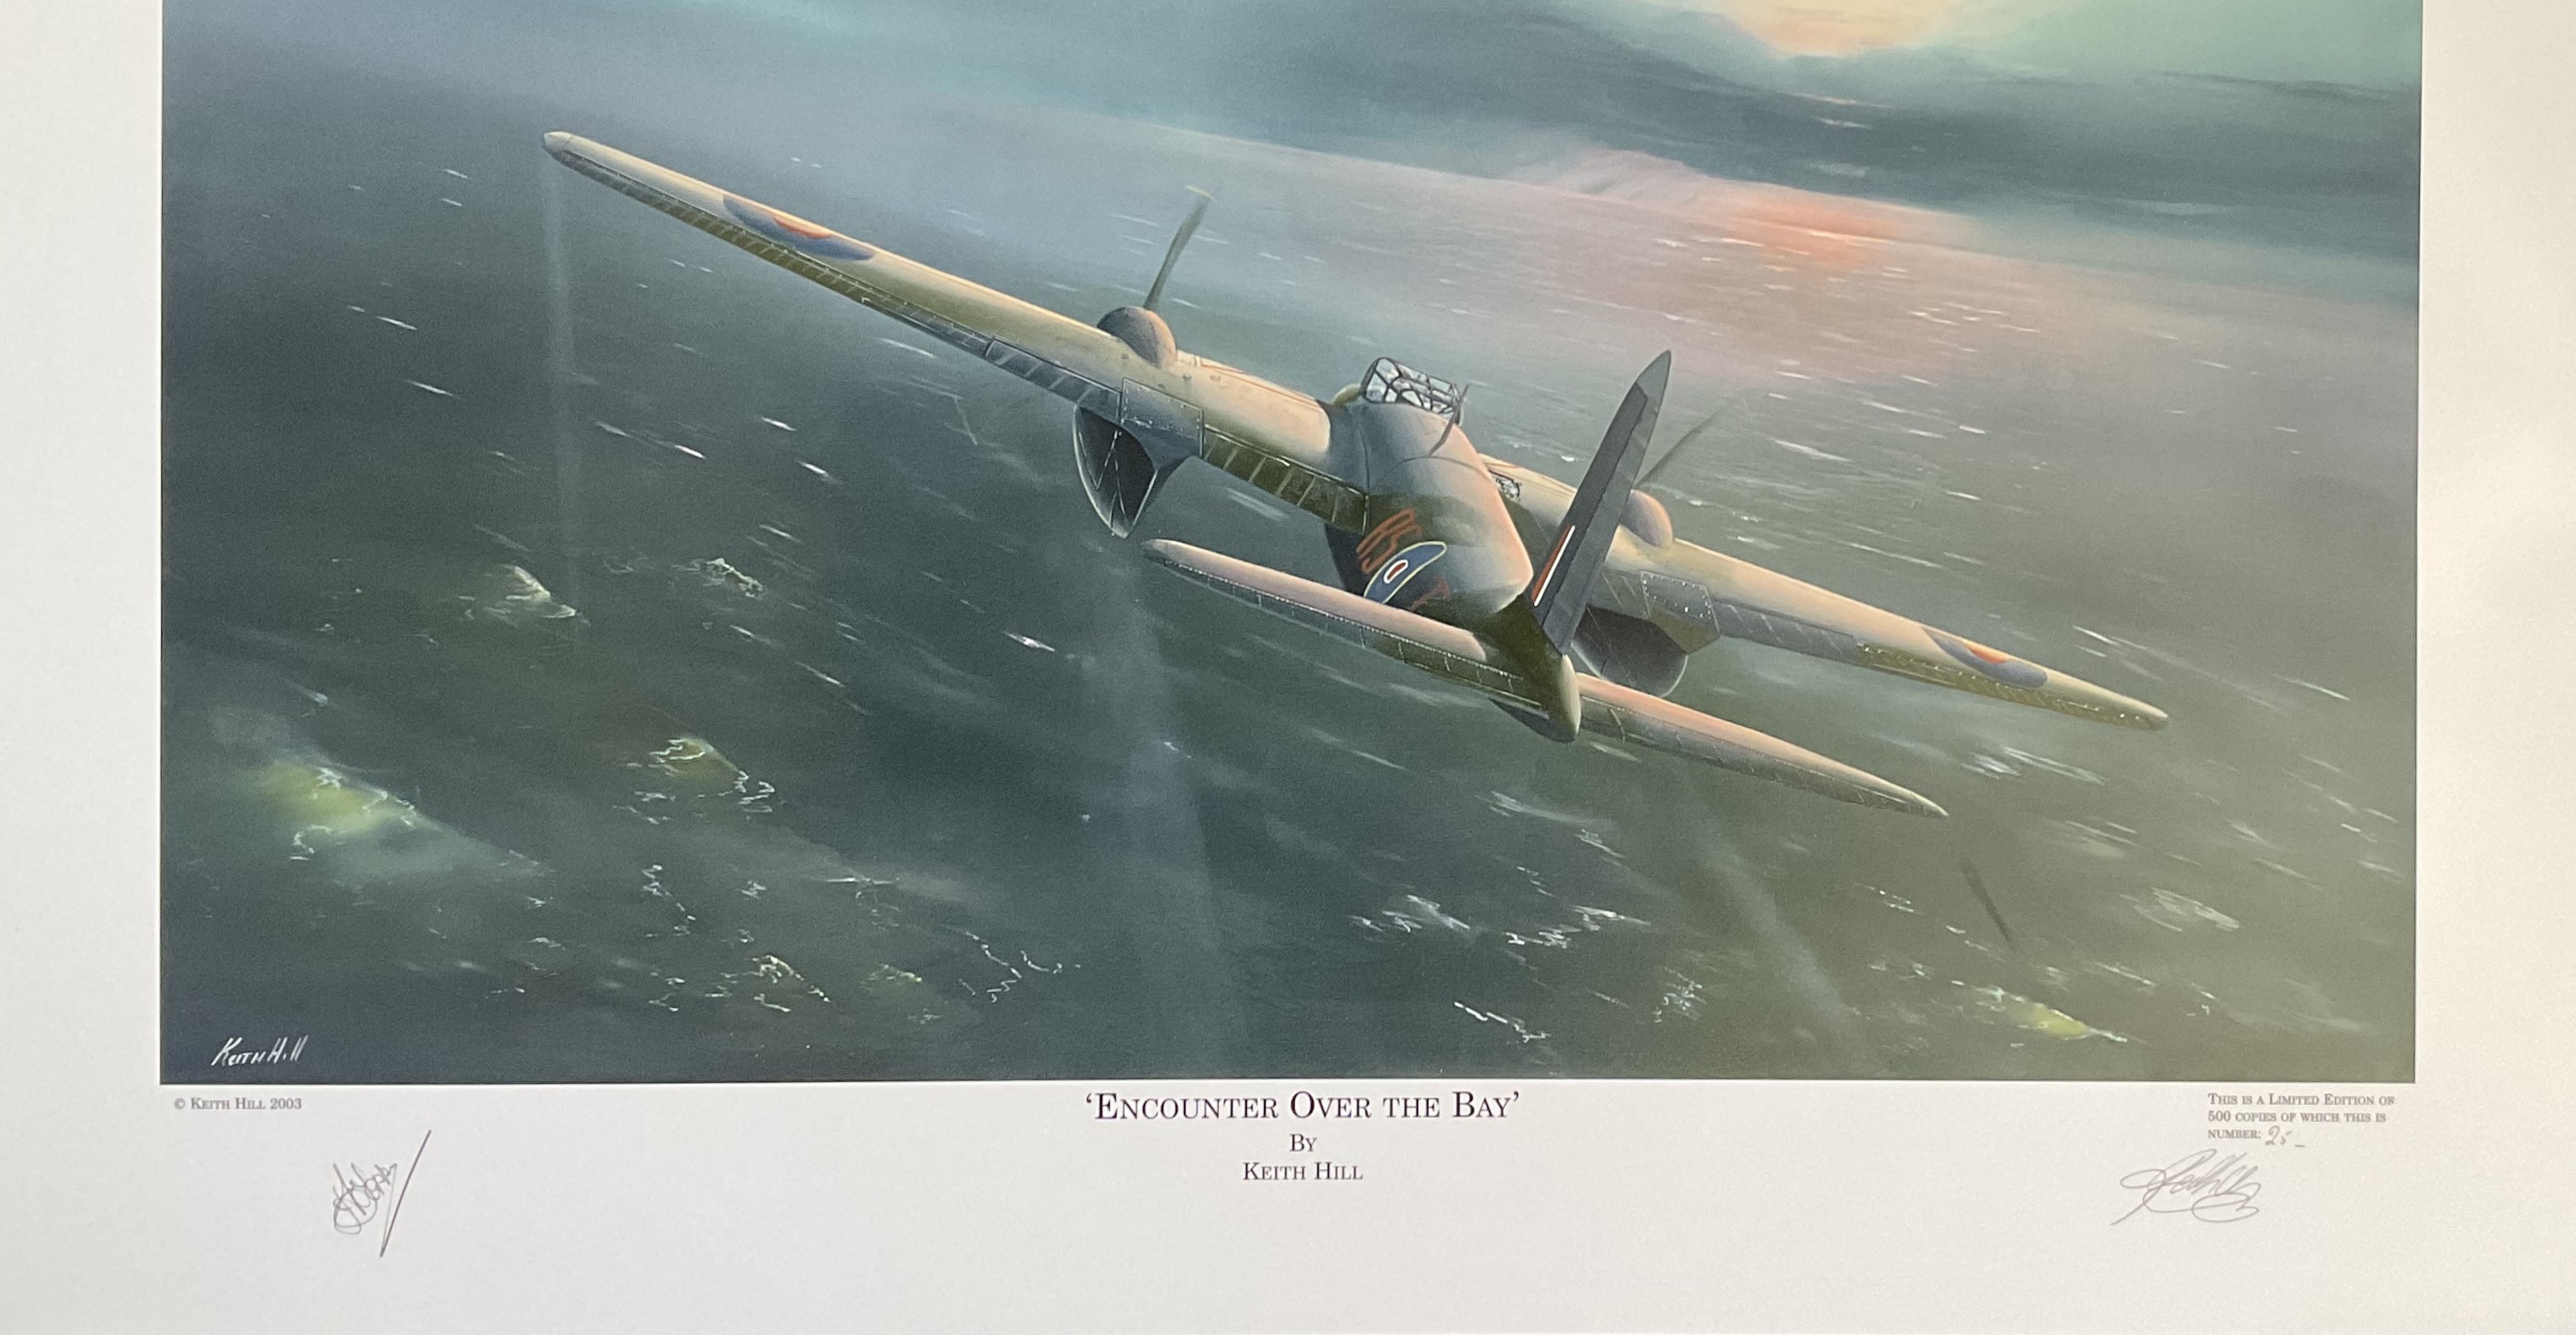 WW2 Colour Print Titled Encounter Over The Bay by Keith Hill. Signed by Keith Hill Artist and Wing - Image 5 of 6